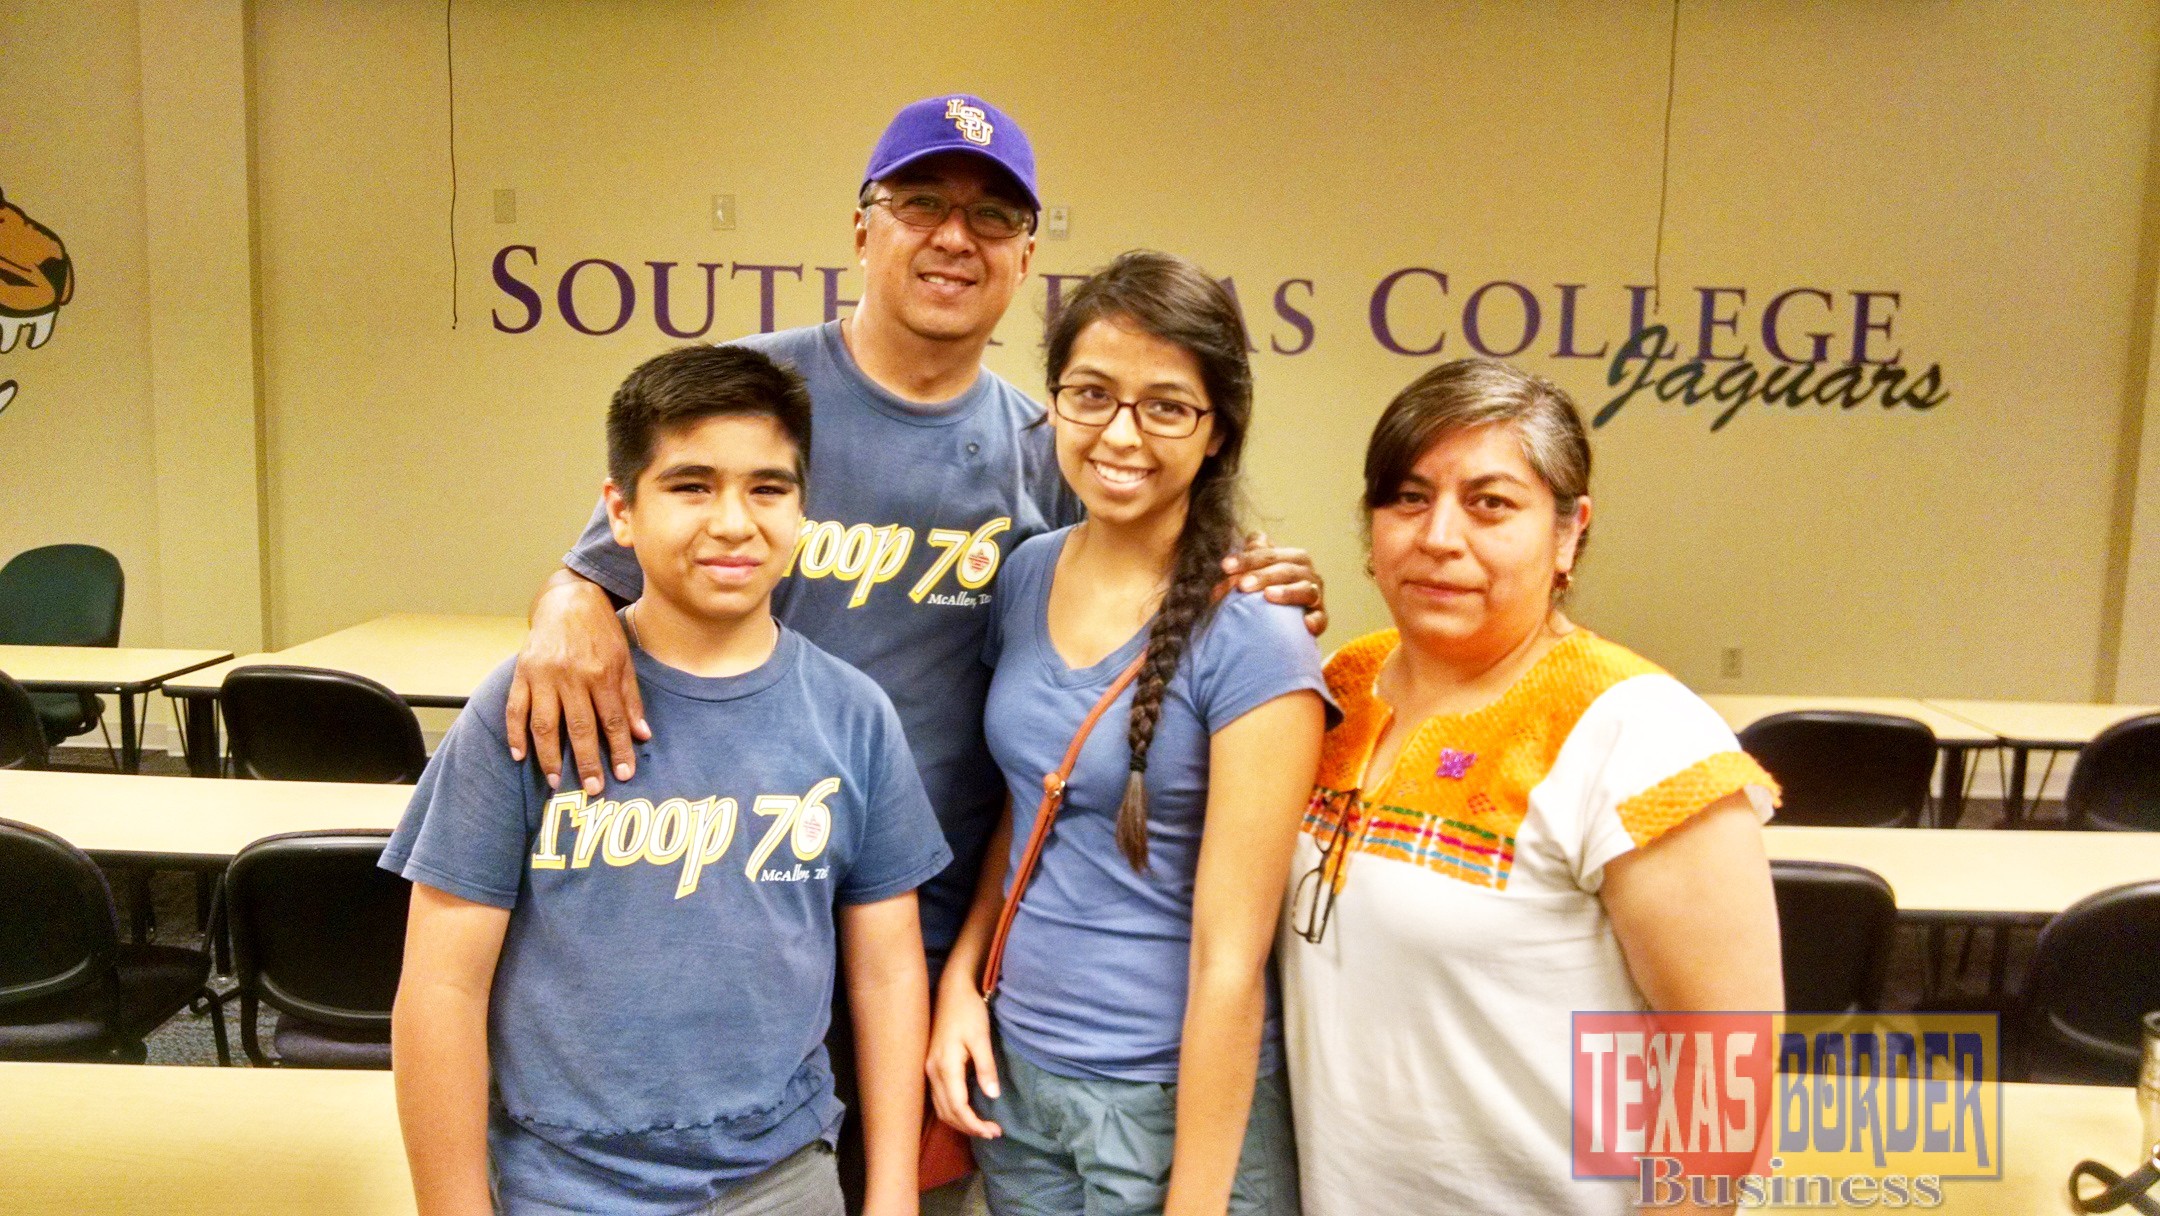 STC Dual Enrollment Student and IB Programme Senior Cristina Franco-Olvera, attended the first Dual2Degree High School Senior & Parent College Day at the Pecan Campus in McAllen. Together with her family, Cristina learned how her college credits could apply to her future studying culinary arts. Note: Cristina is pictured in the middle.